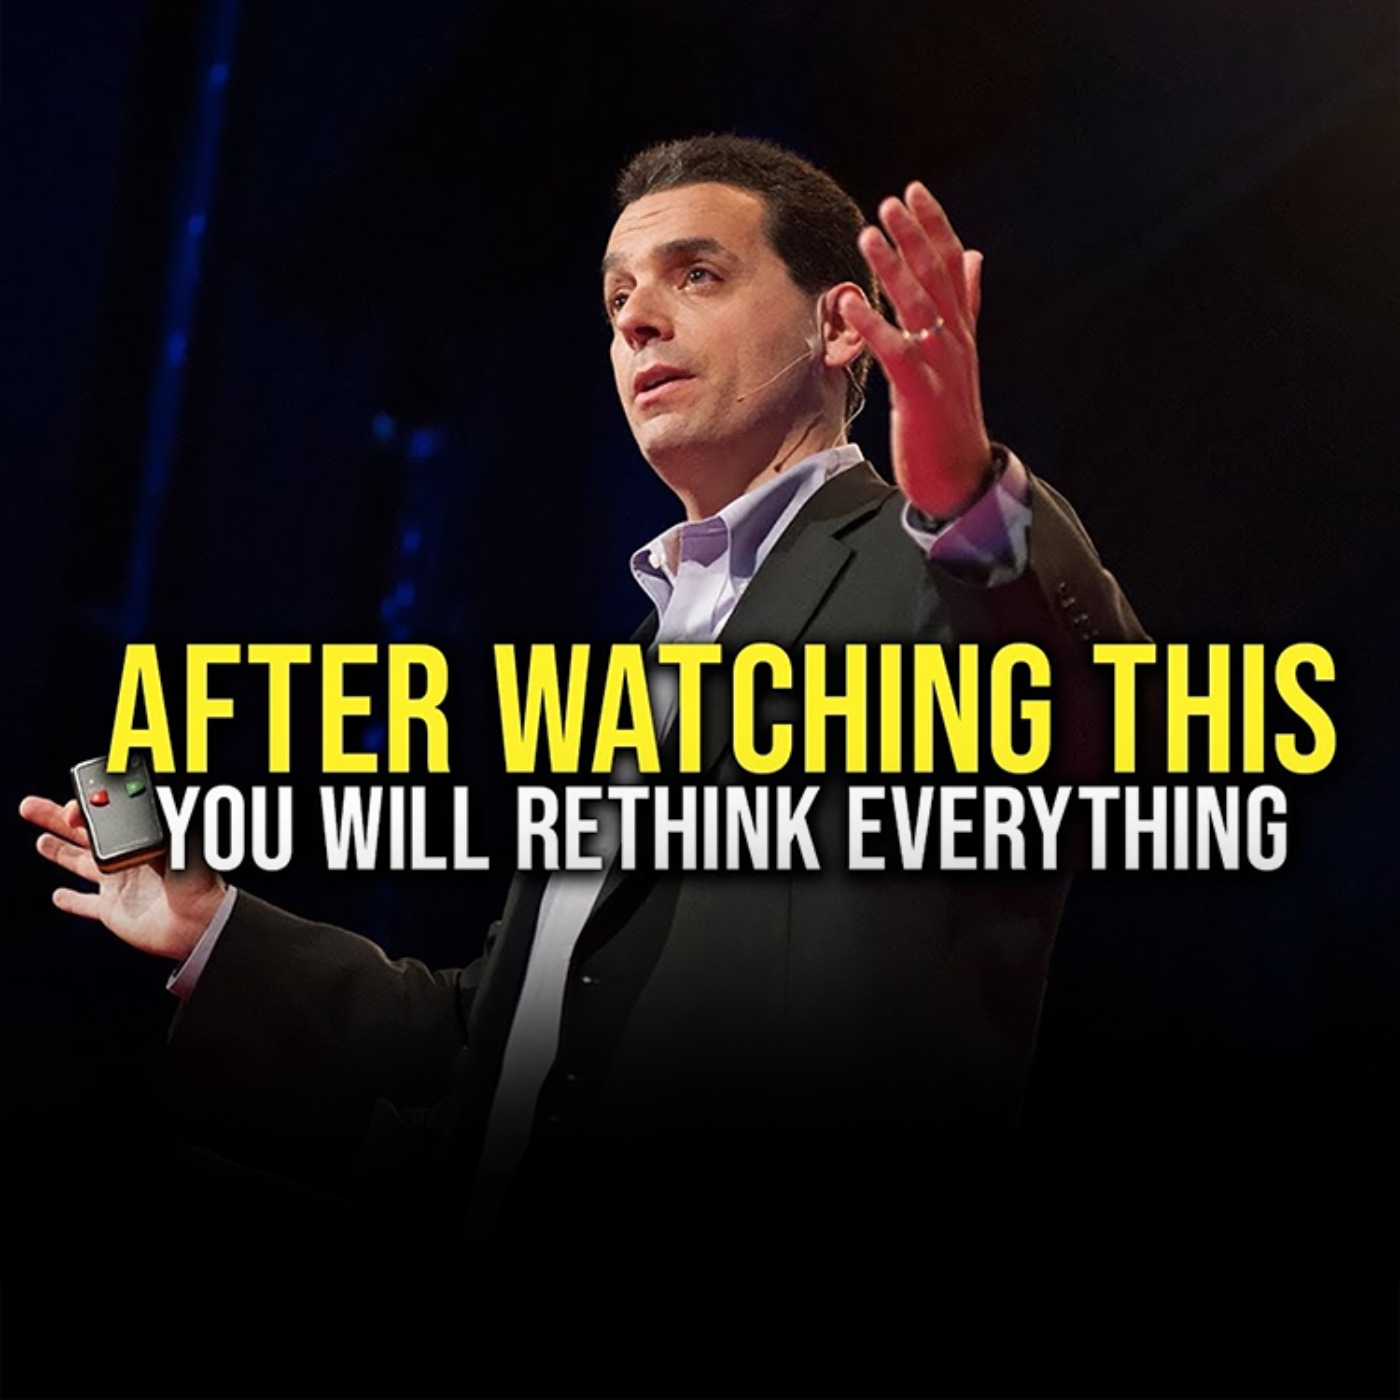 One of the Greatest Speeches Ever | Daniel Pink